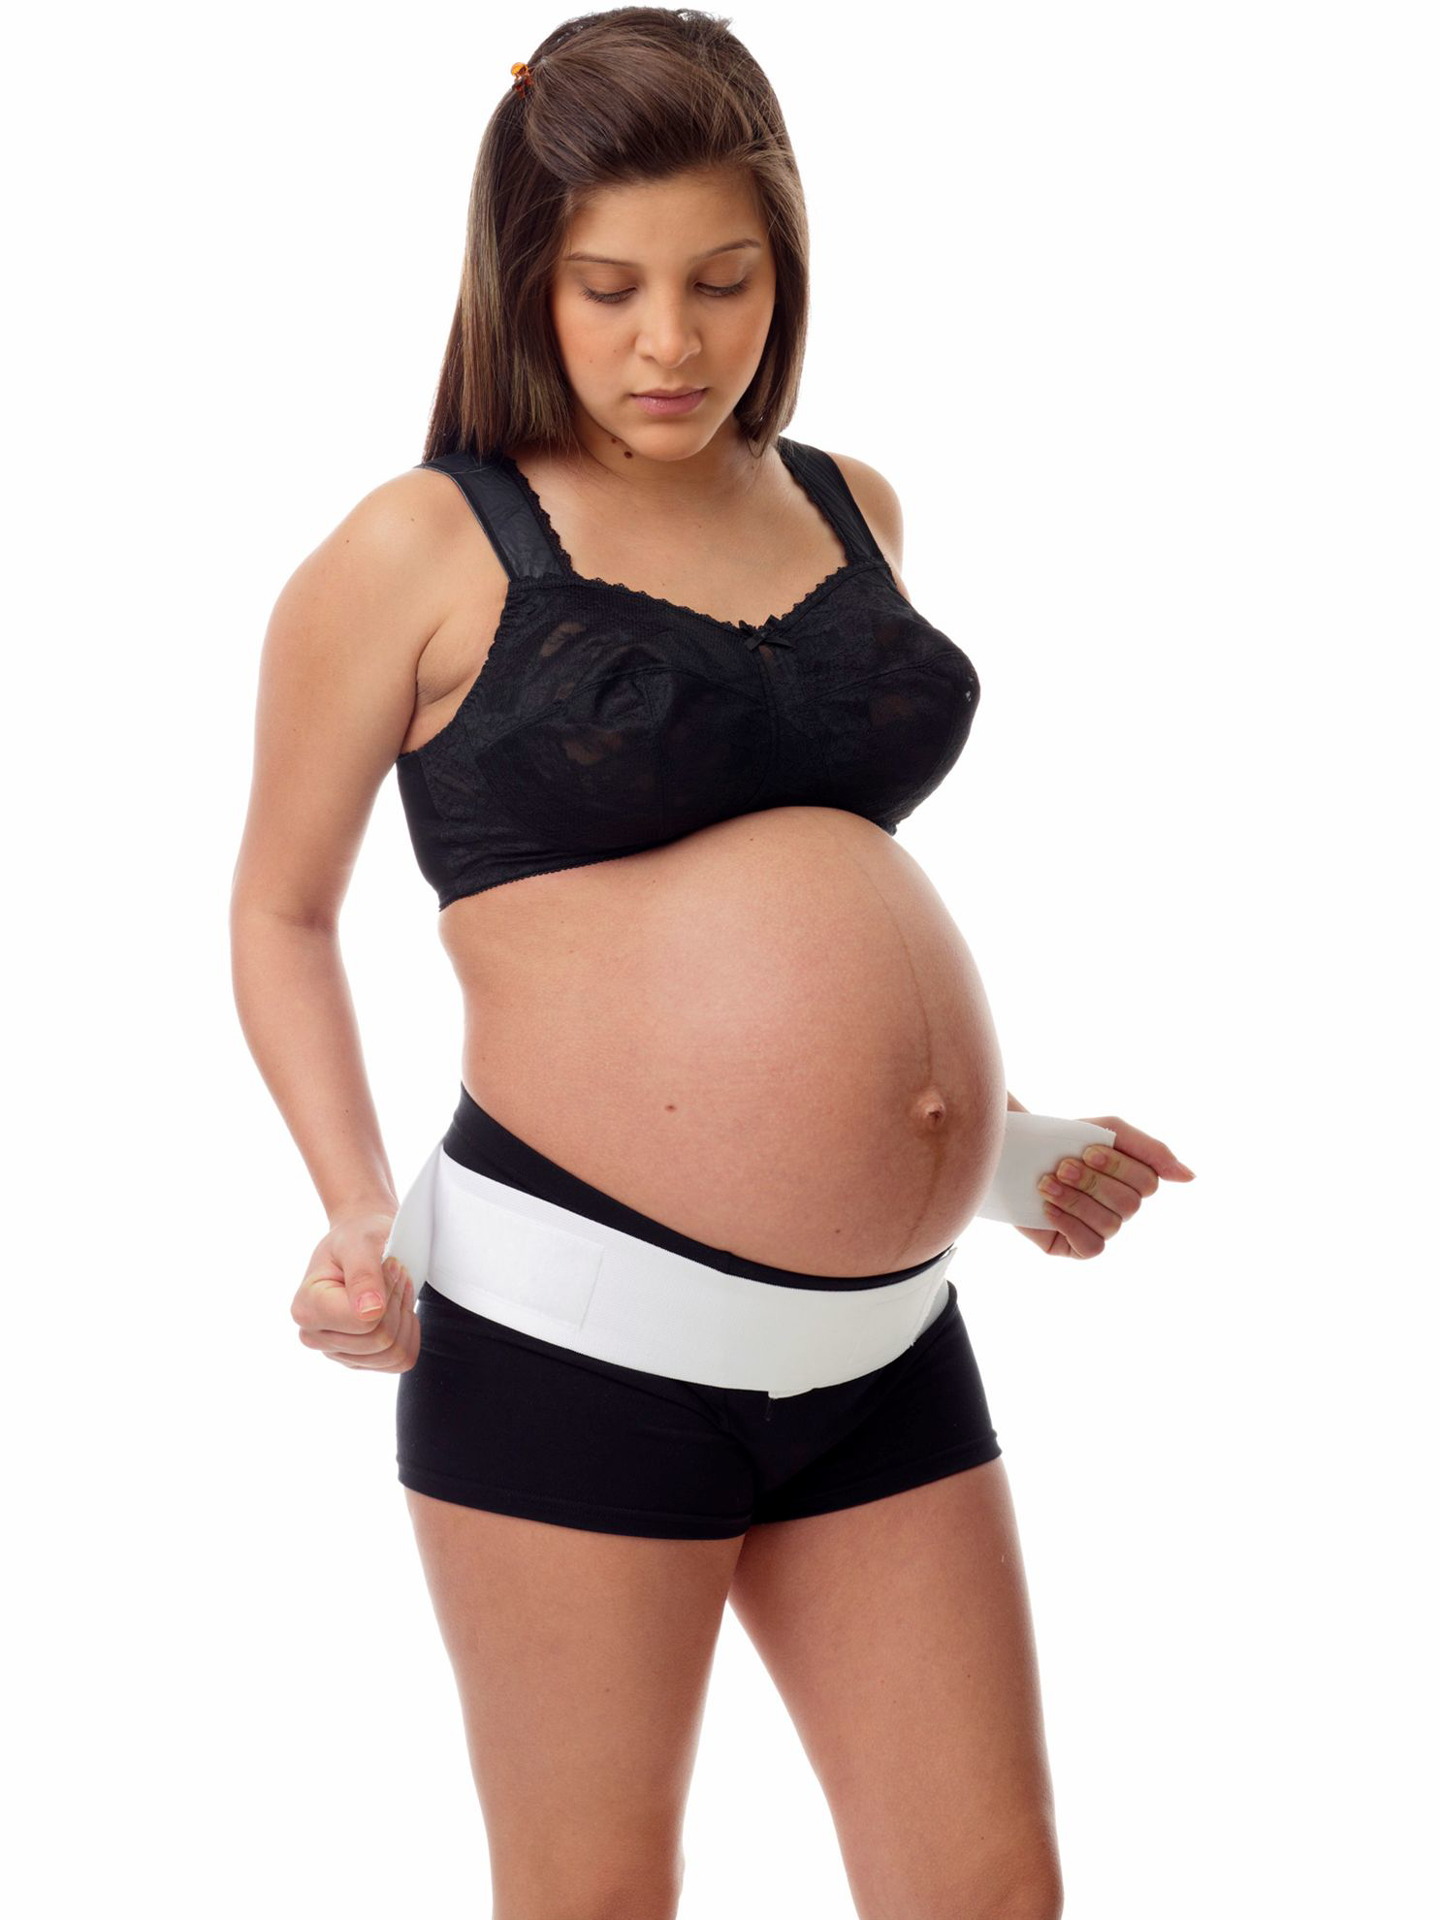 Maternity Support Belt, Select Orders Ship Free